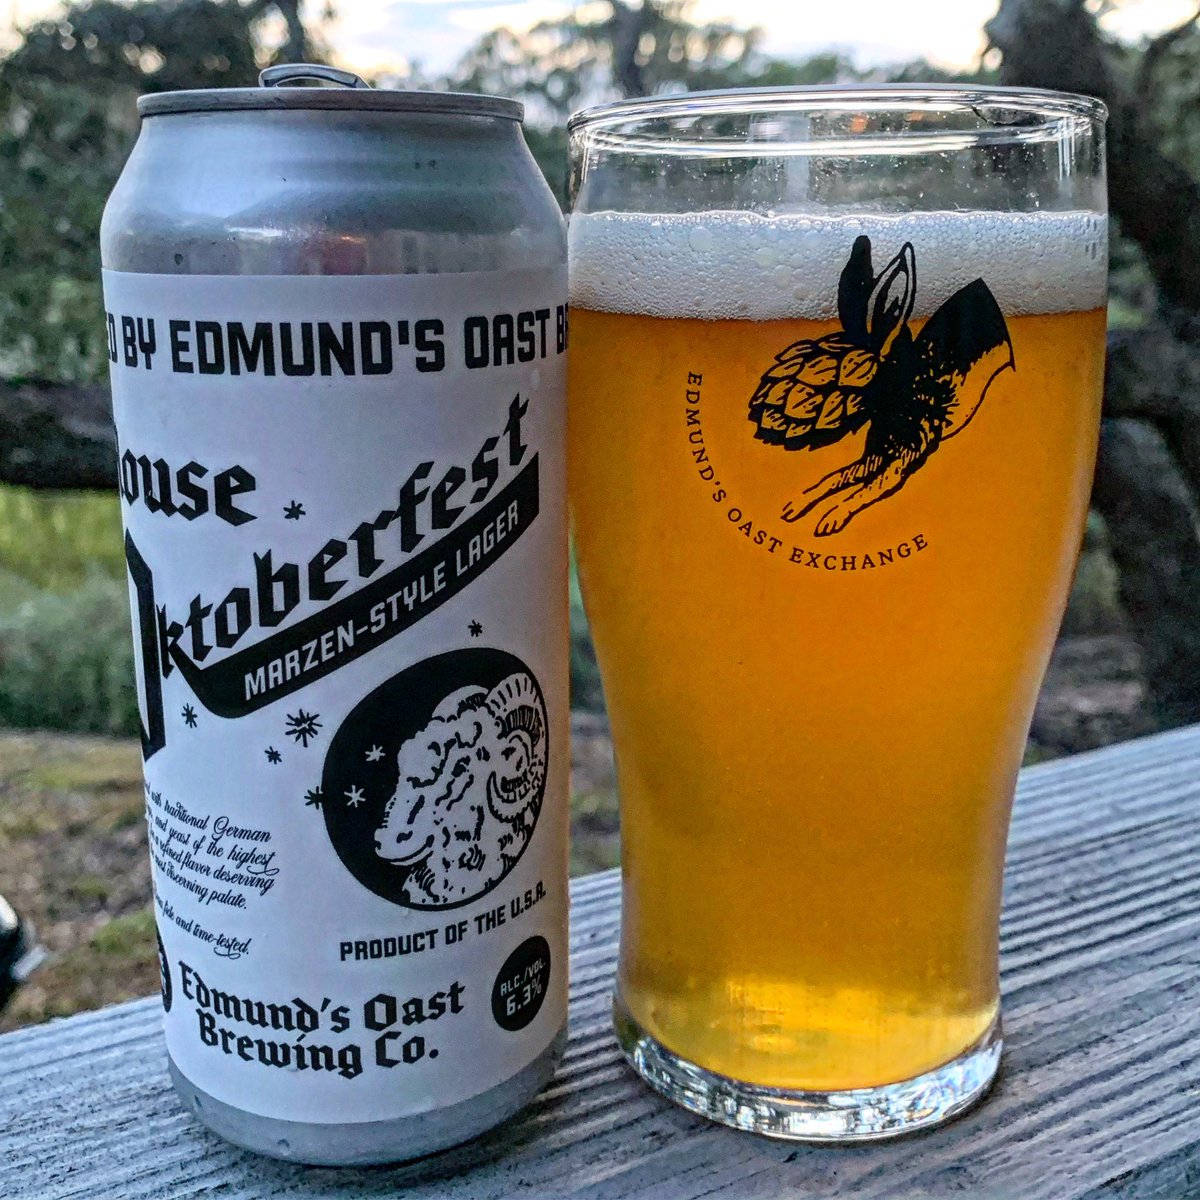 Some @EdmundsOast tonight on the cove 🍺 #chsbeer